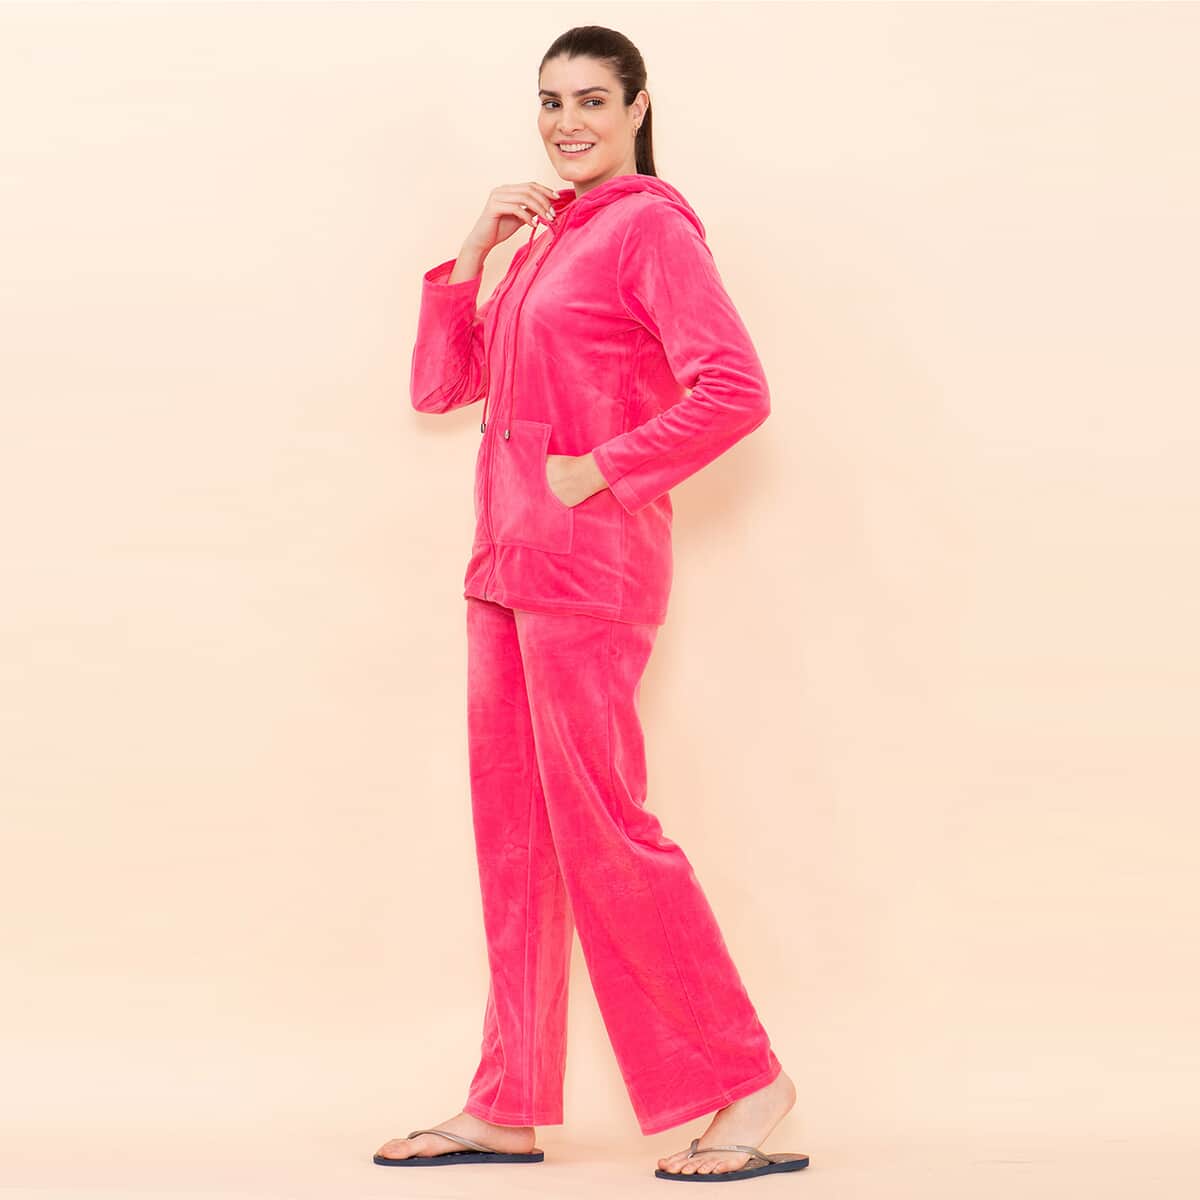 Tamsy LUX Pink Velour Track Suit Set - L image number 5